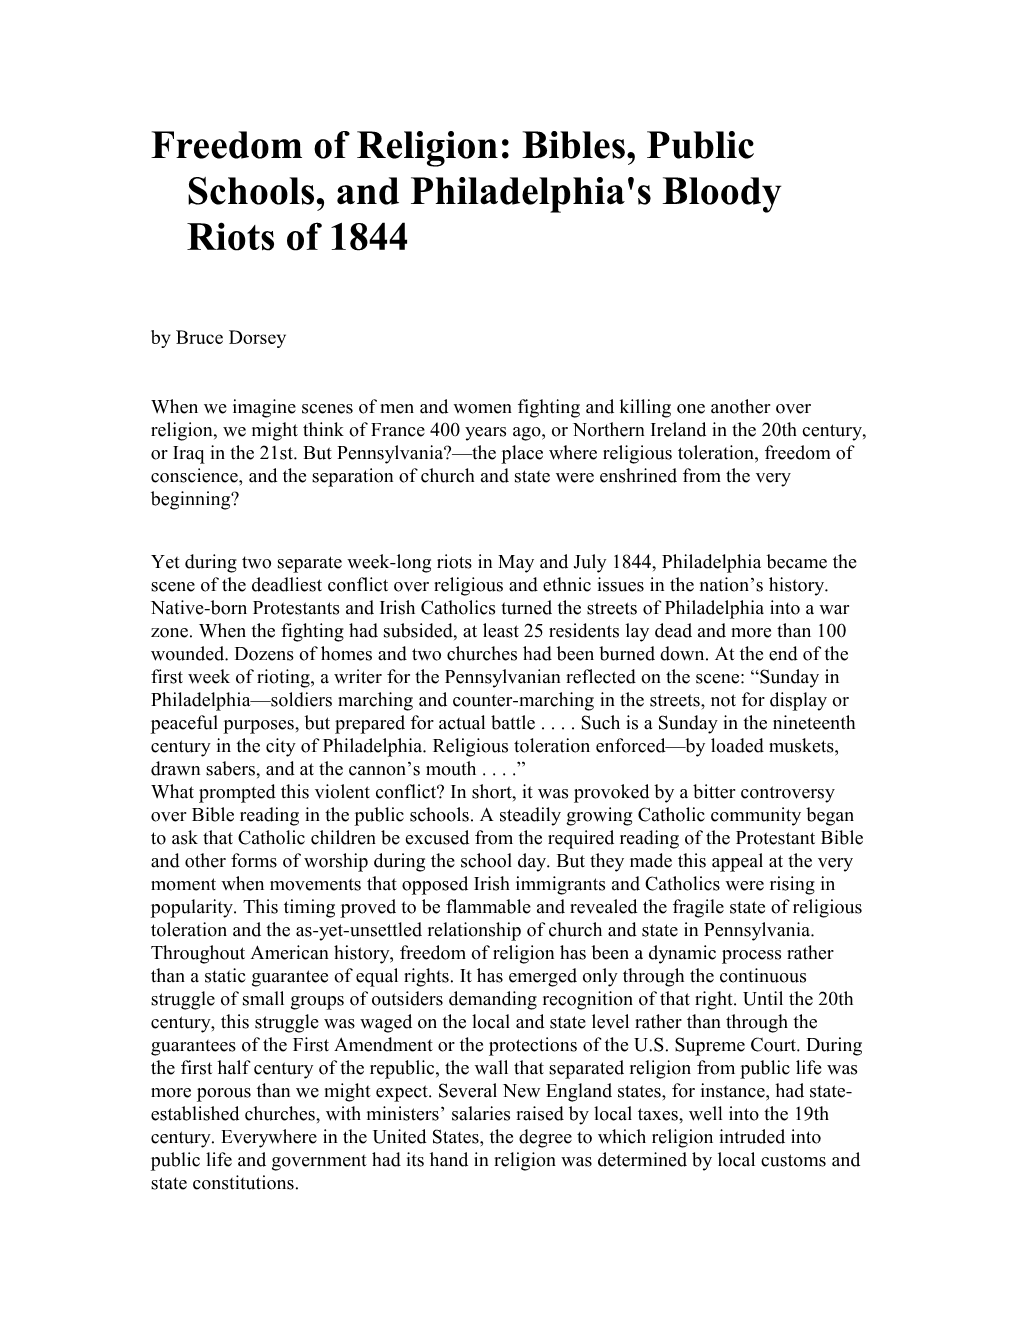 Freedom of Religion: Bibles, Public Schools, and Philadelphia's Bloody Riots of 1844